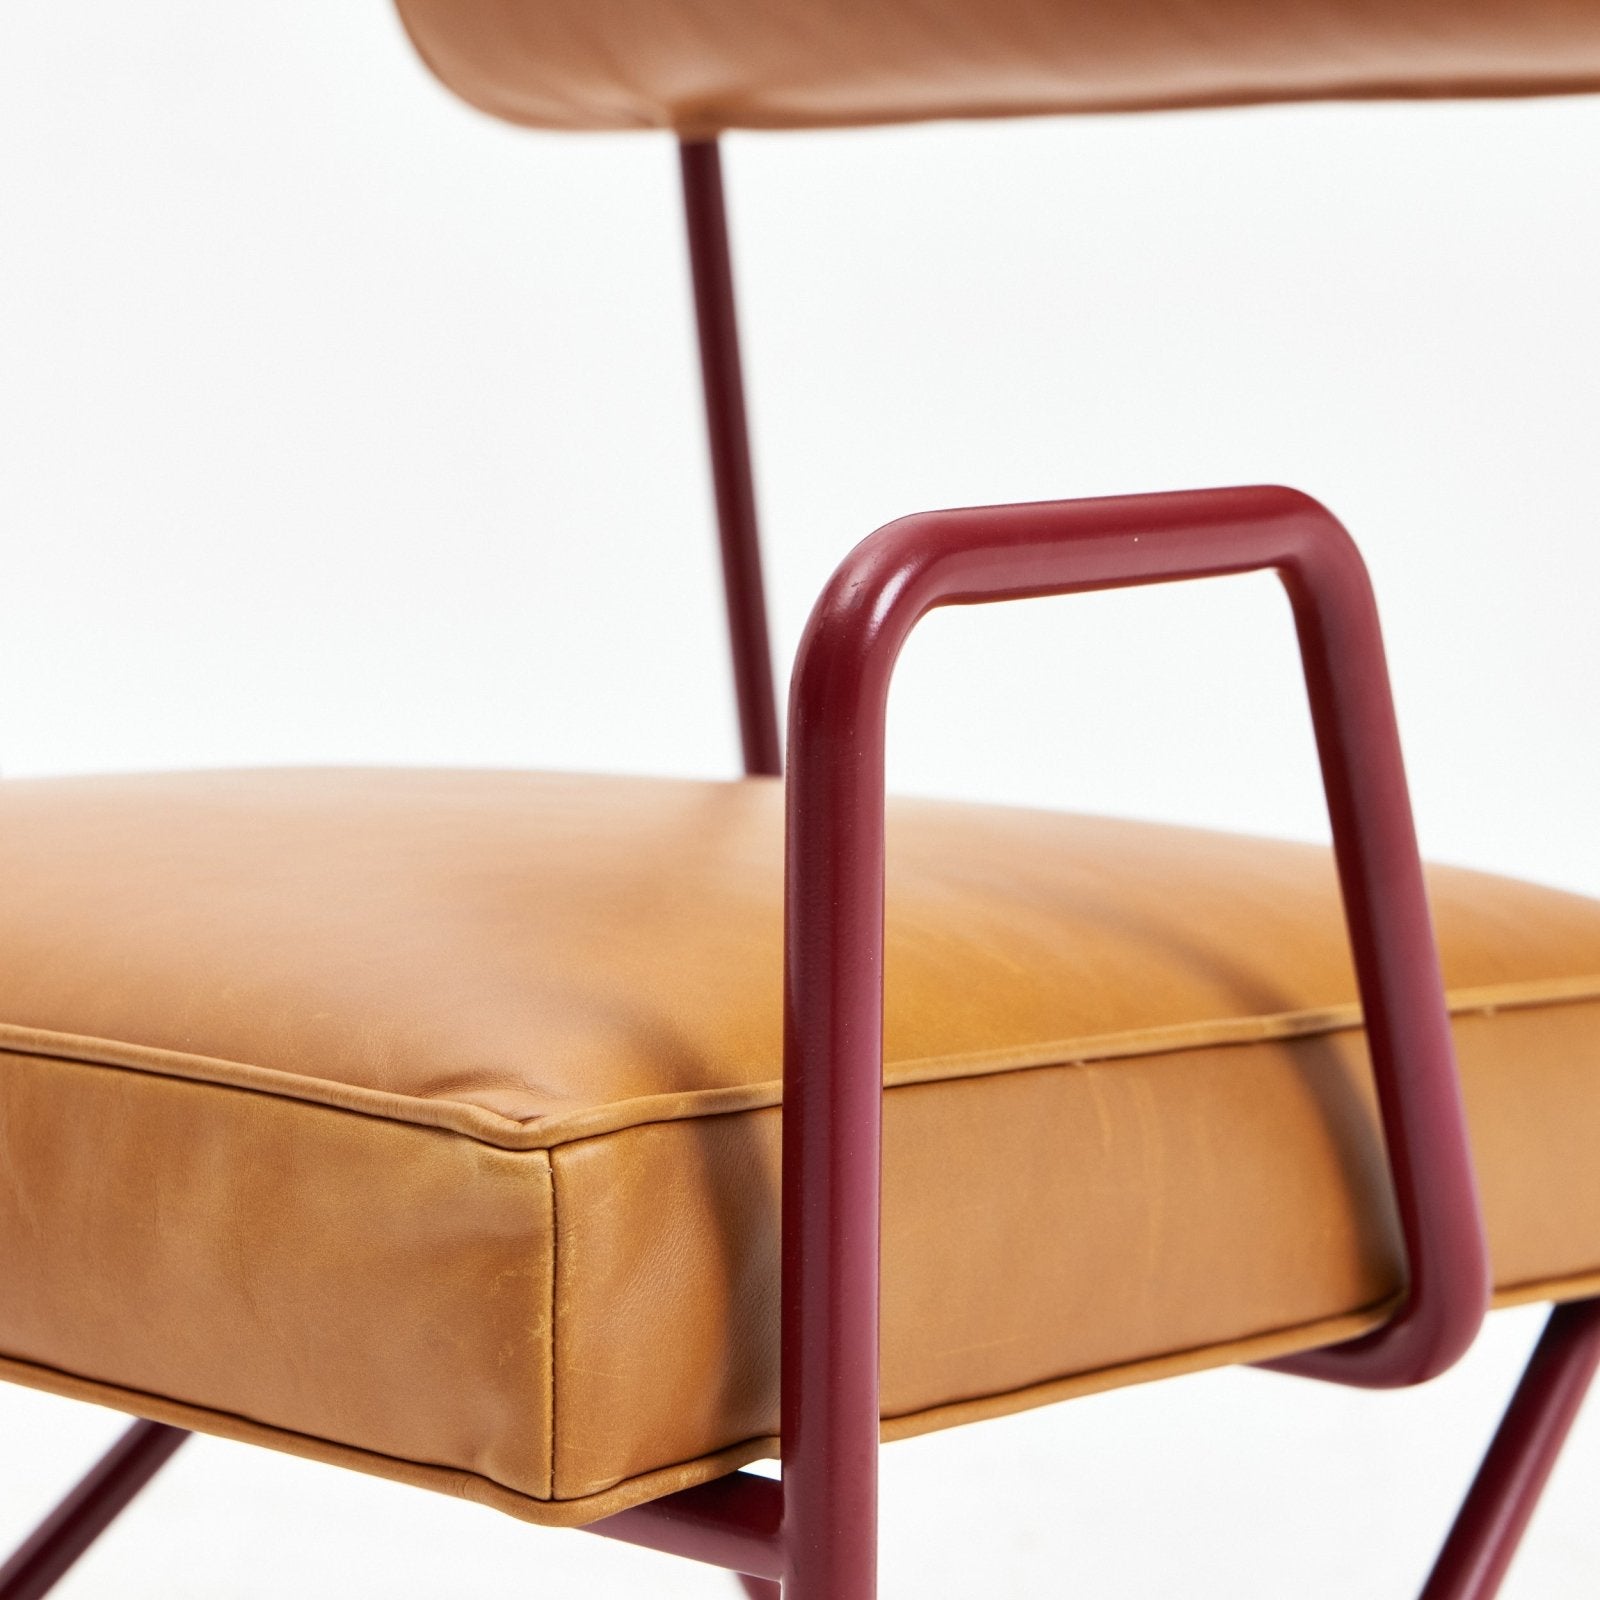 Larry's Lounge Sessel - Hellbraun/Bordeaux Seating von Project 213A